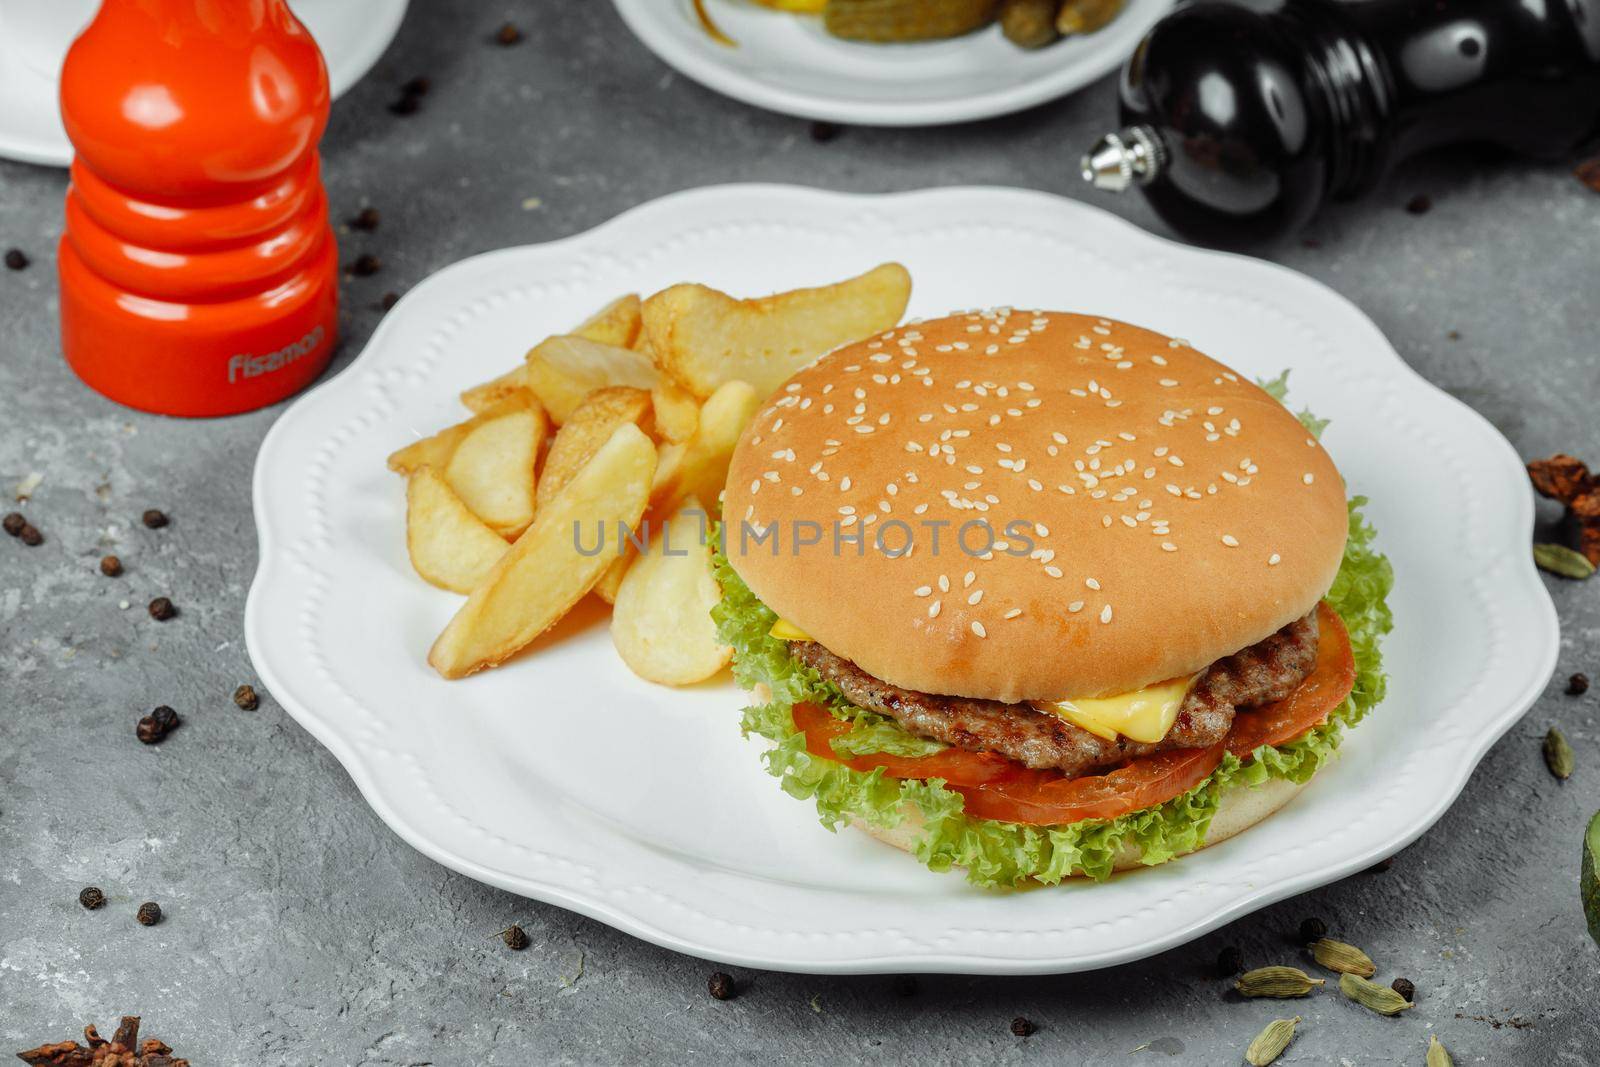 hamburger with fries and salad on the plate.